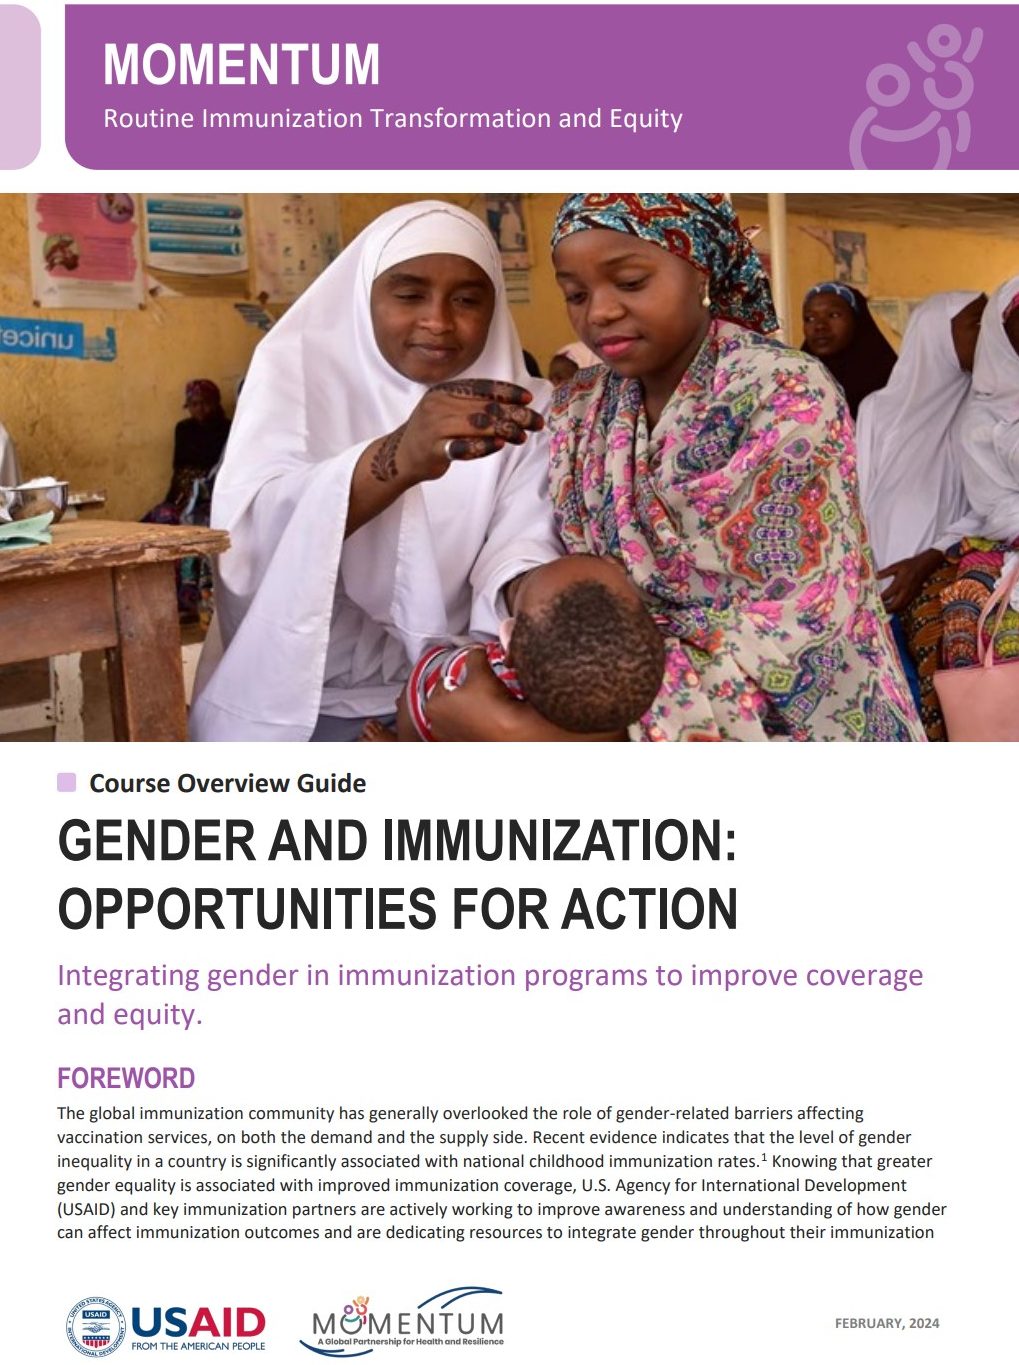 Gender and Immunization: Opportunities for Action